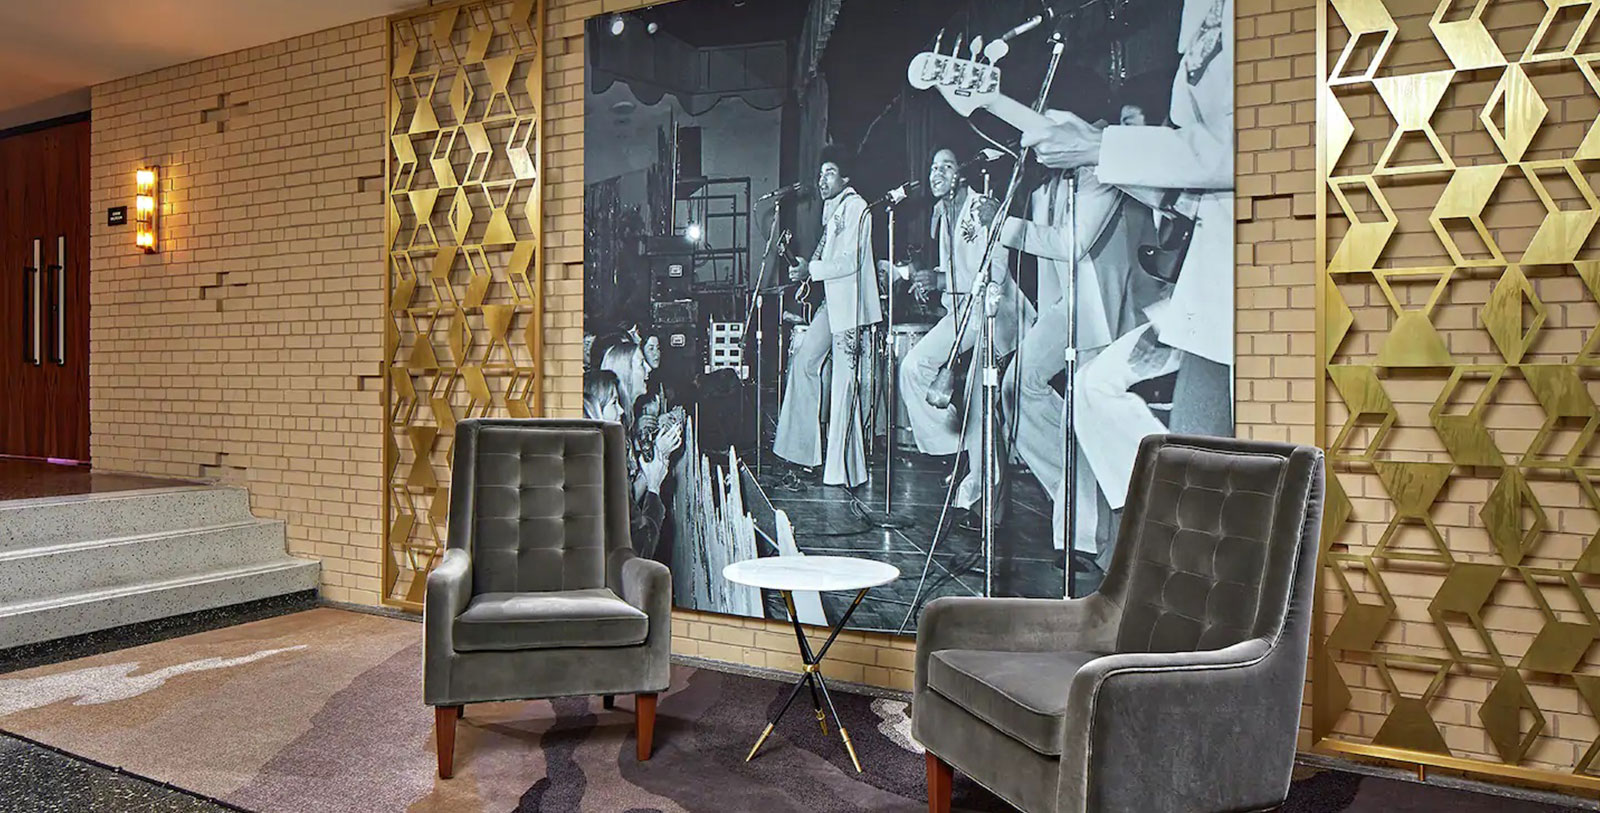 Discover The Statler's stunning Grand Ballroom where The Jackson 5 once performed.